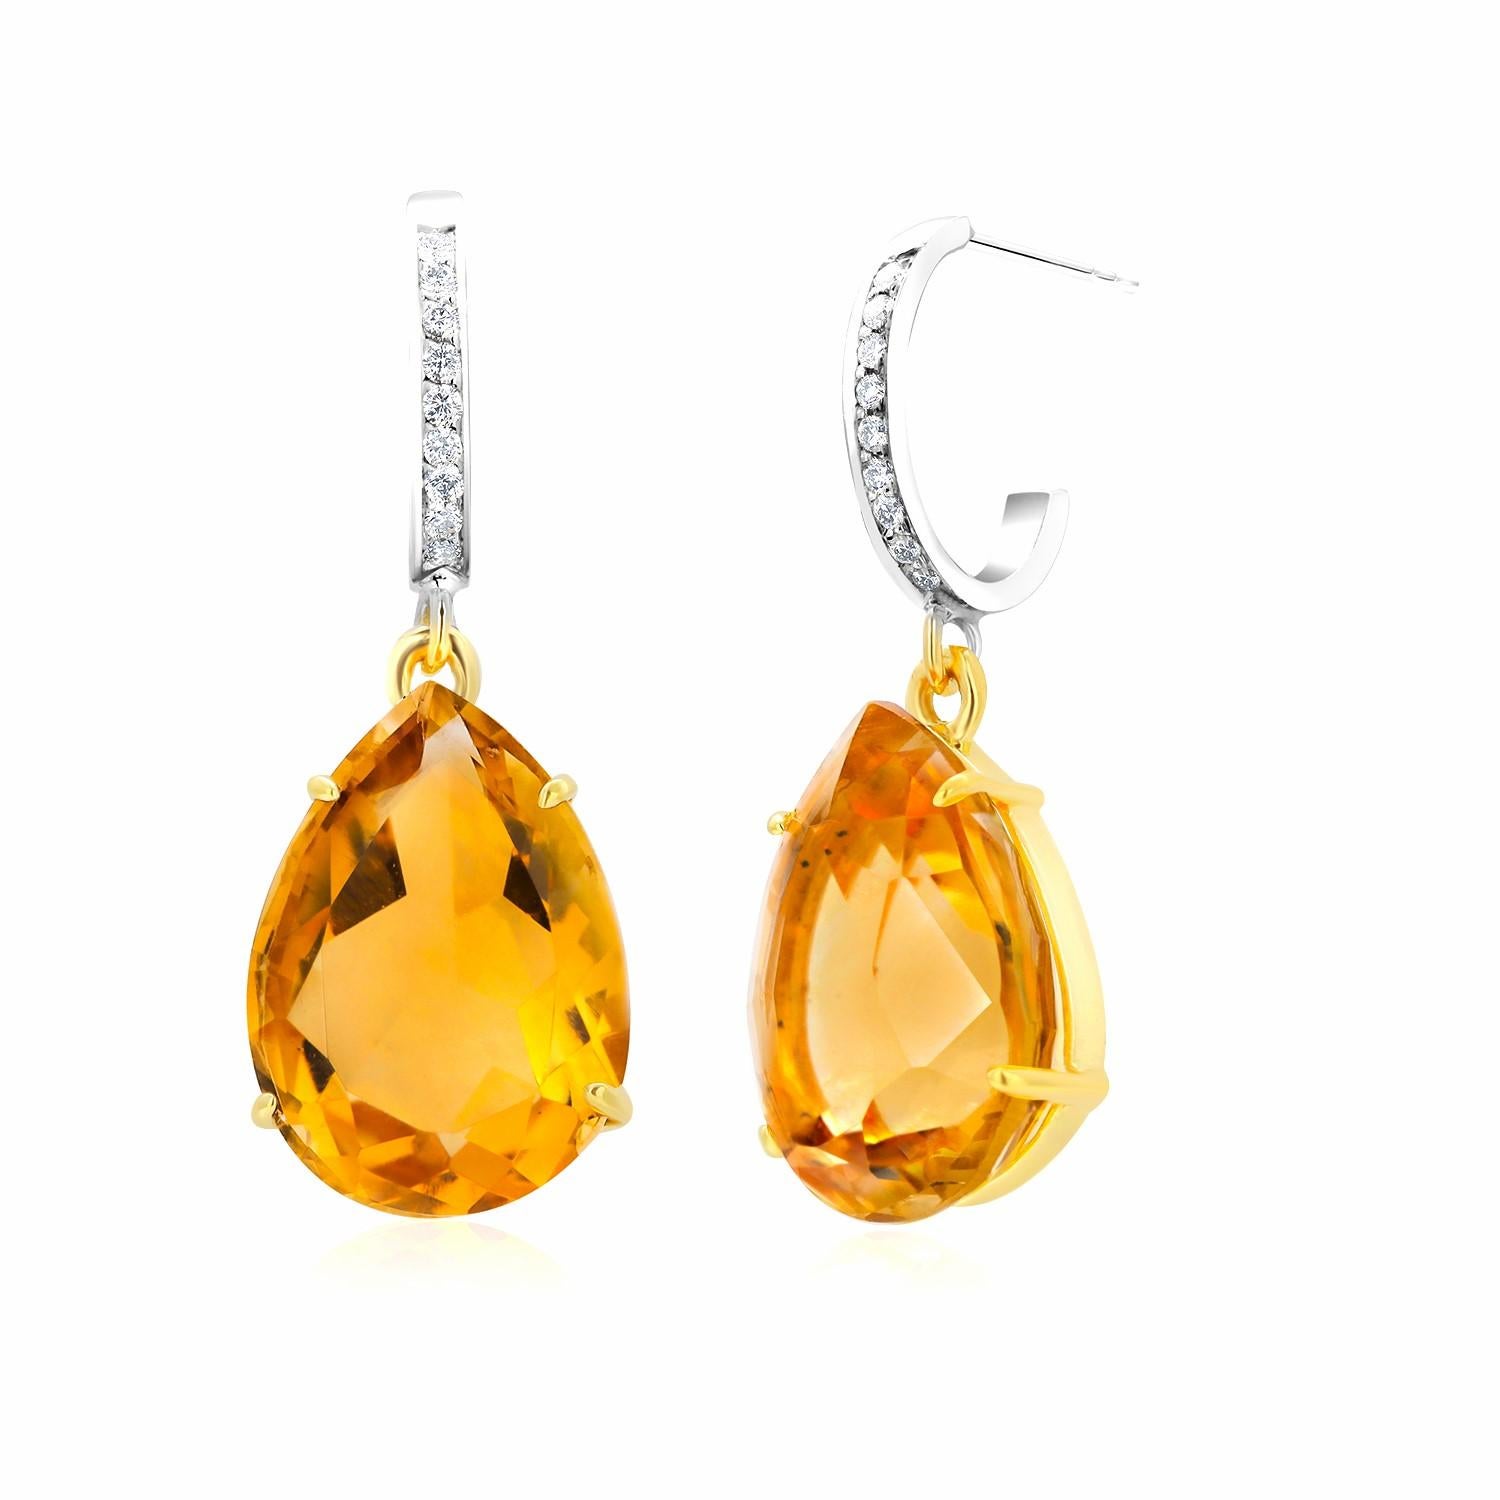 Pear Cut Pear Shaped Yellow Citrine and Diamond Hoop Gold Earrings Weighing 17.65 Carat